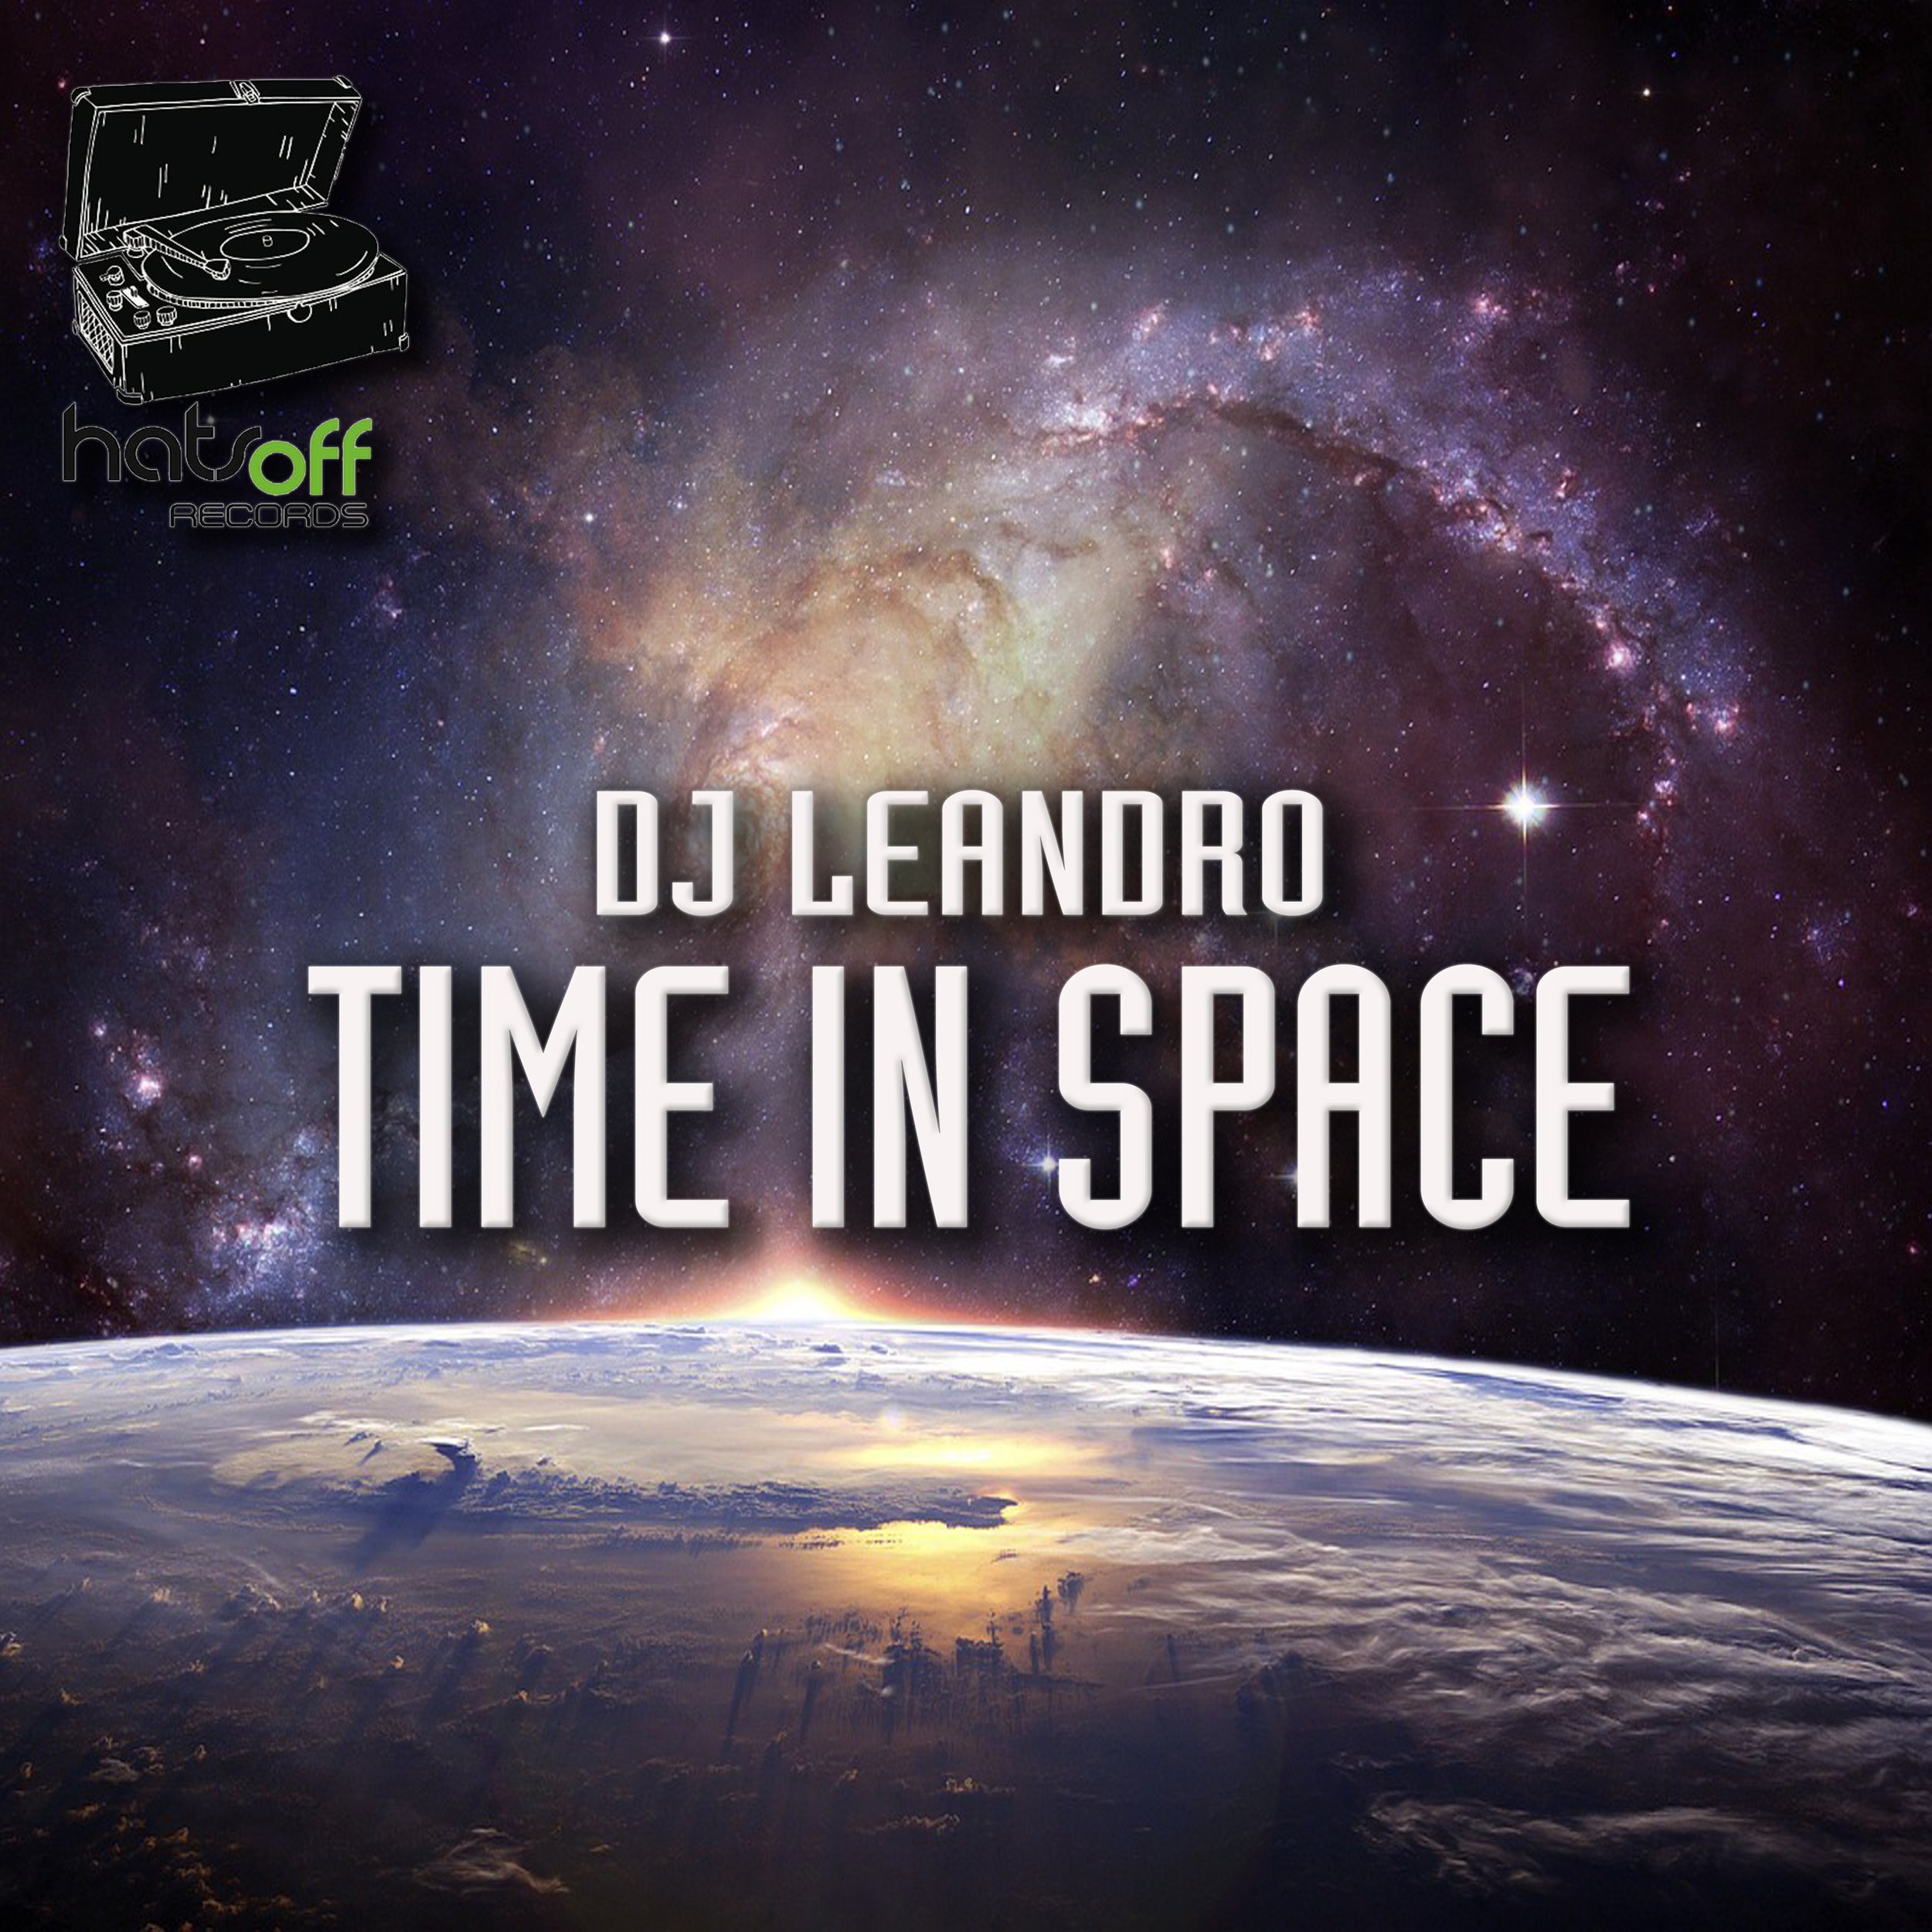 Time in space [HATS OFF RECORDS]